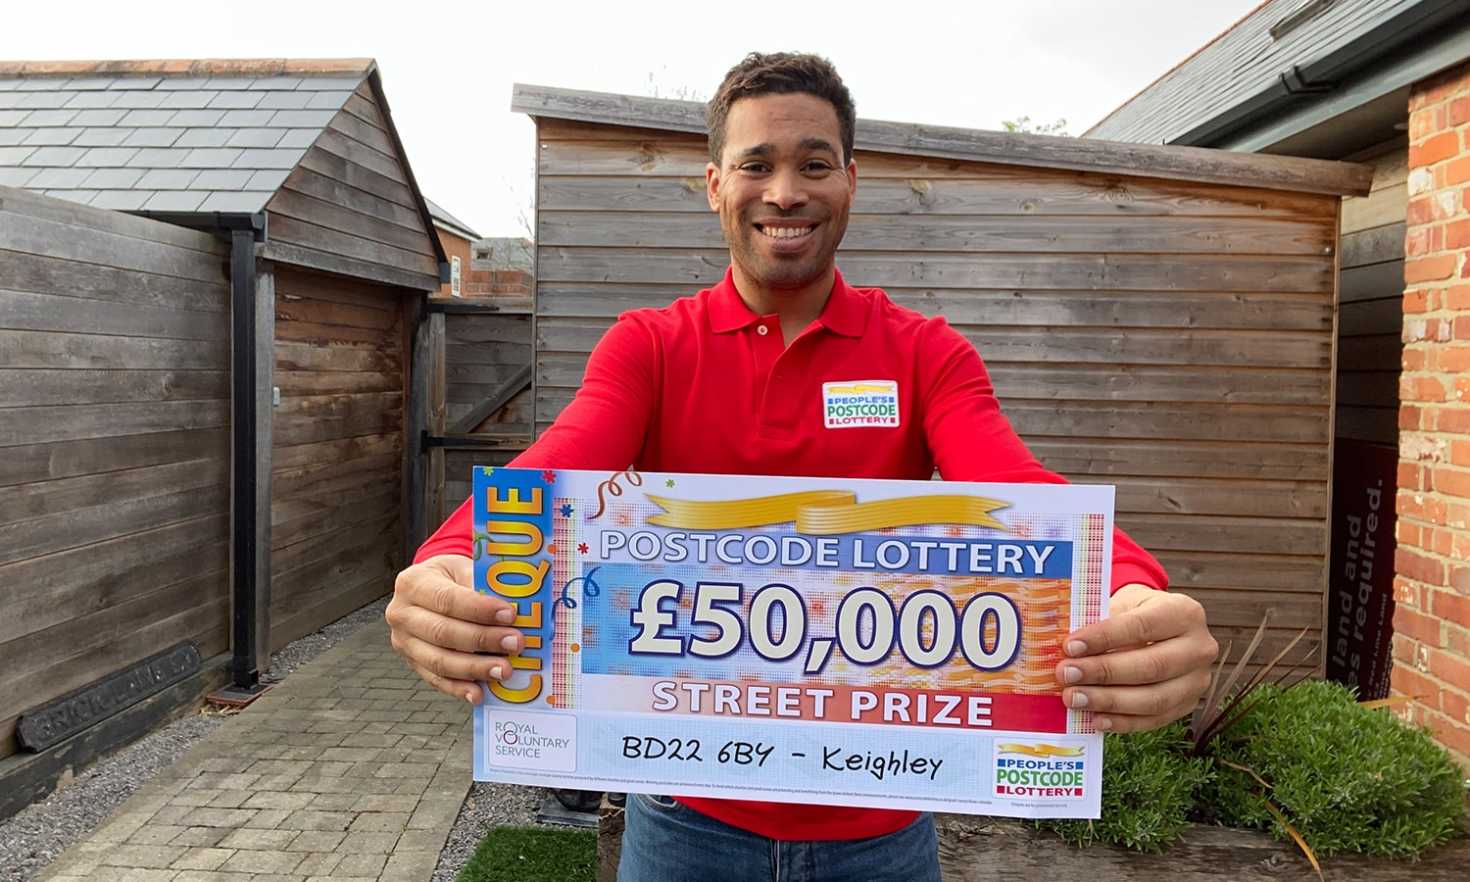 Danyl reveals a fantastic £50,000 prize for one lucky player in BD22 6BY